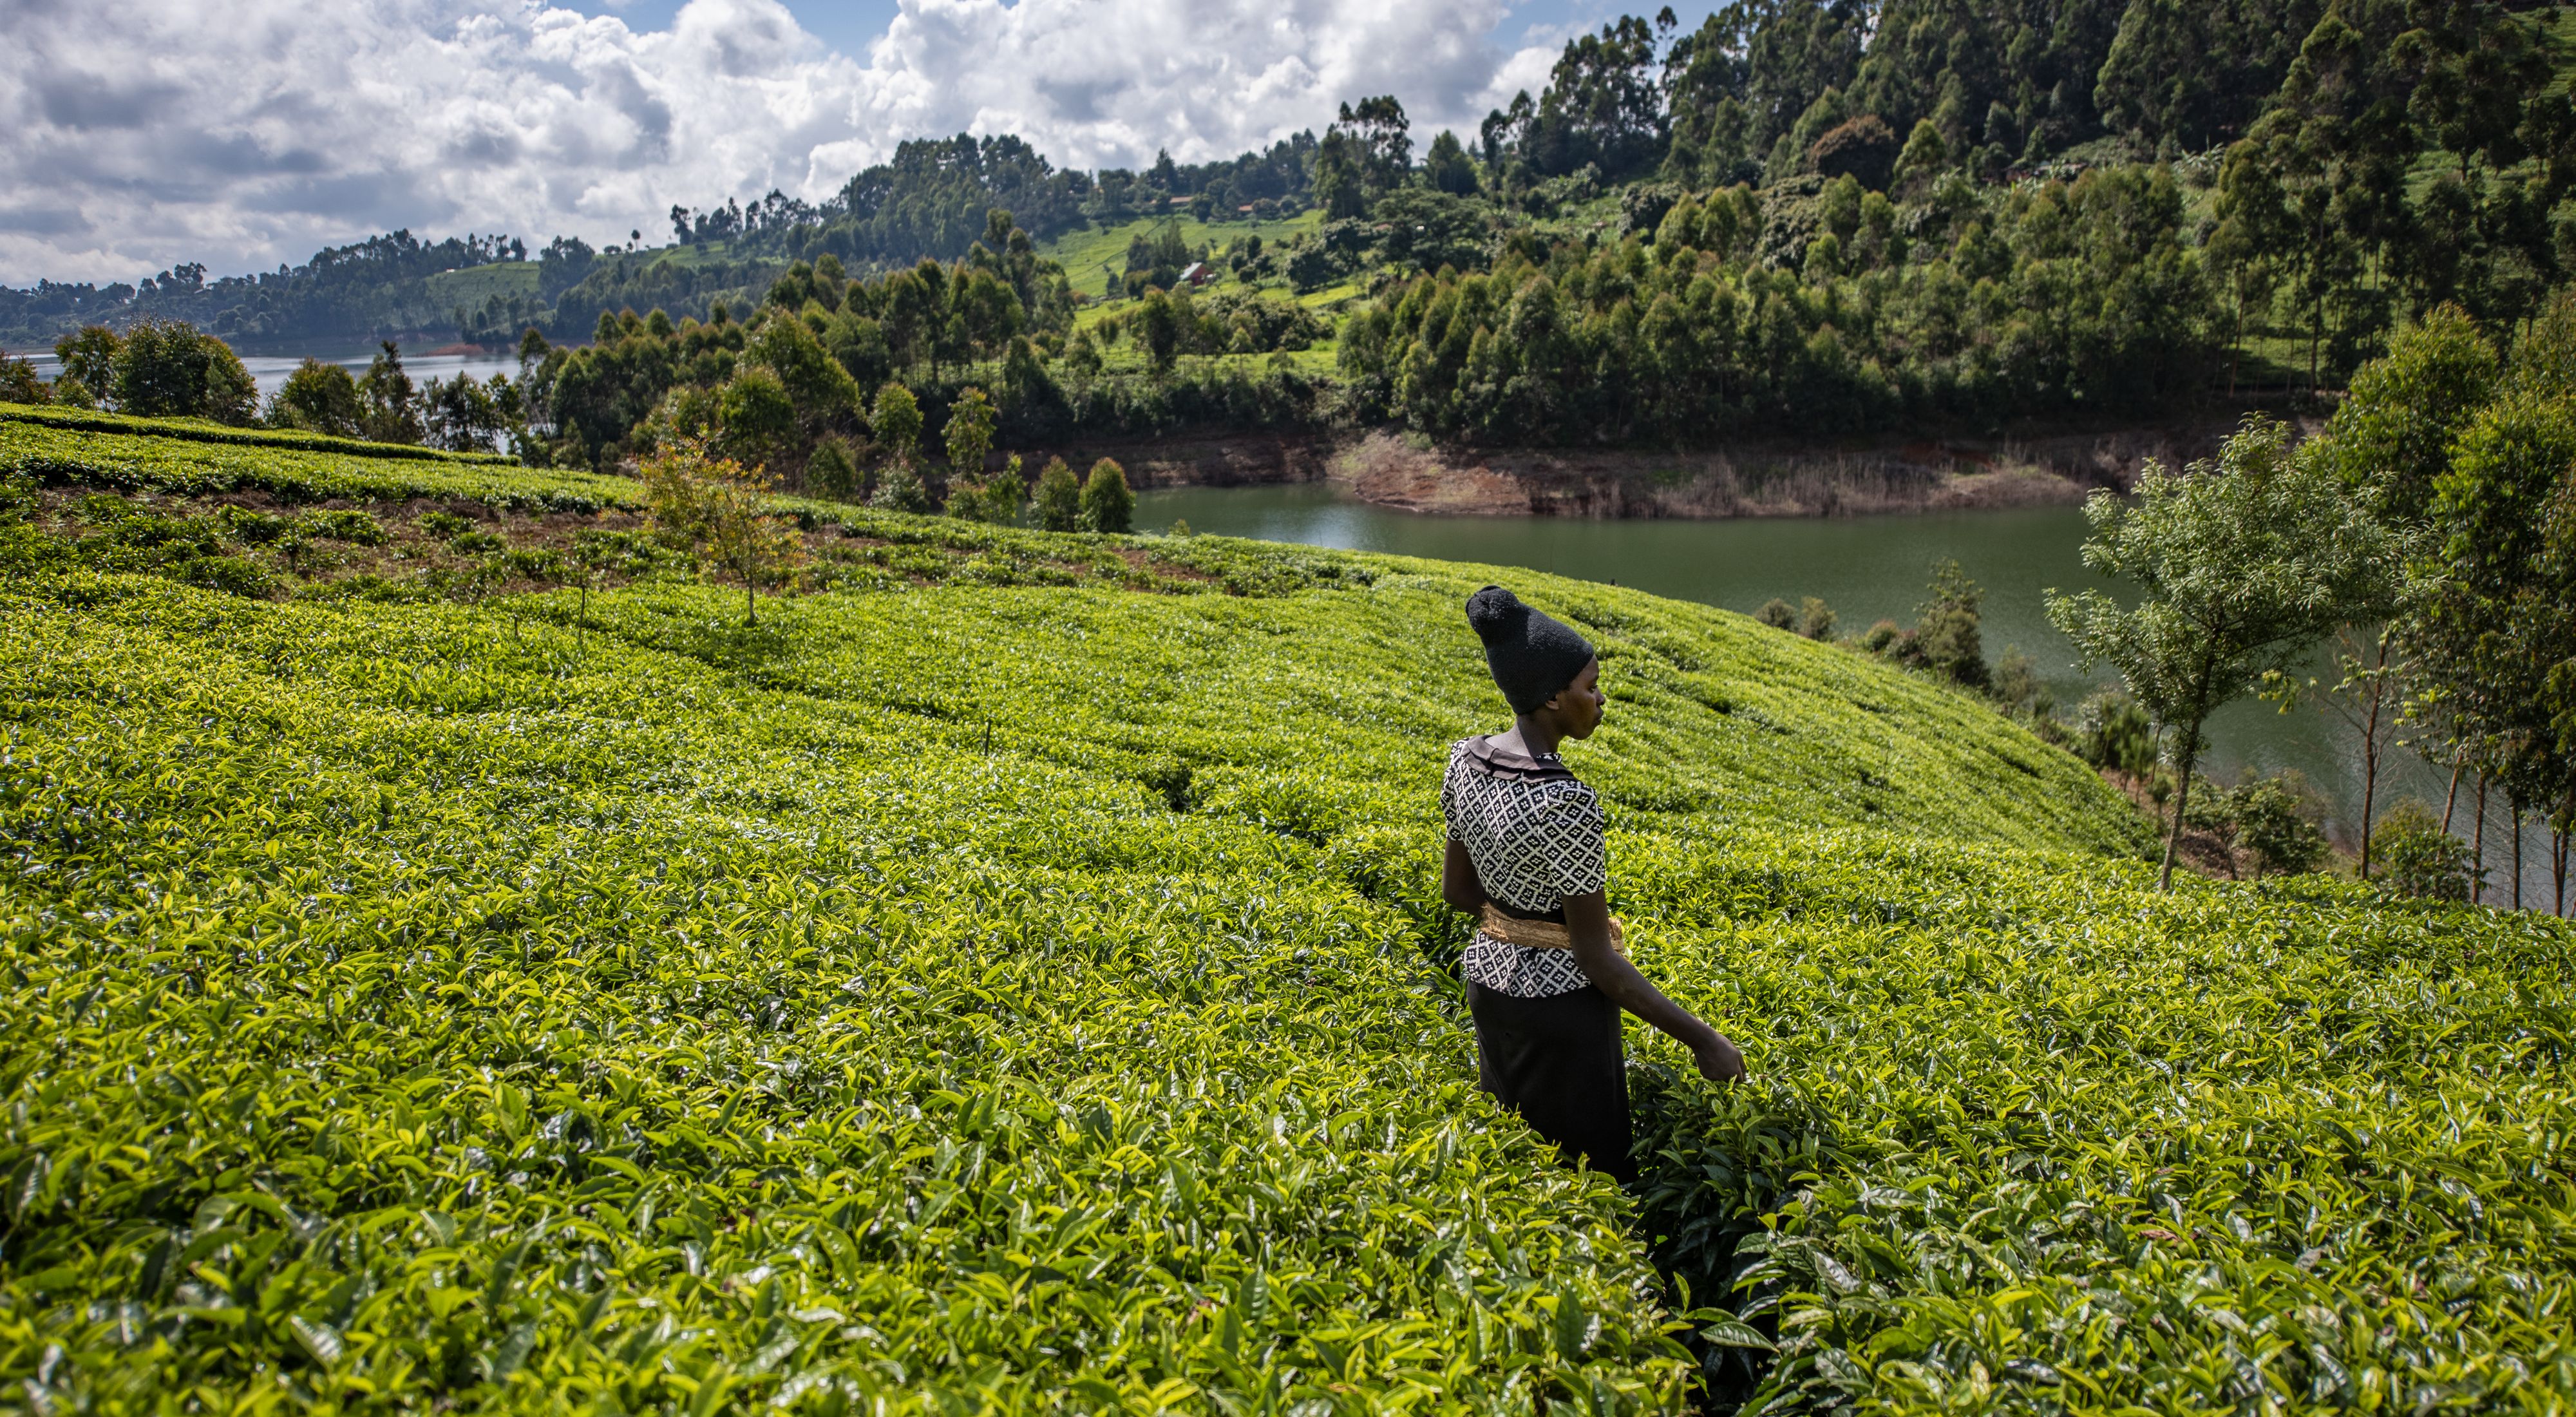 A woman stands in the midst of a lush tea farm near a reservoir